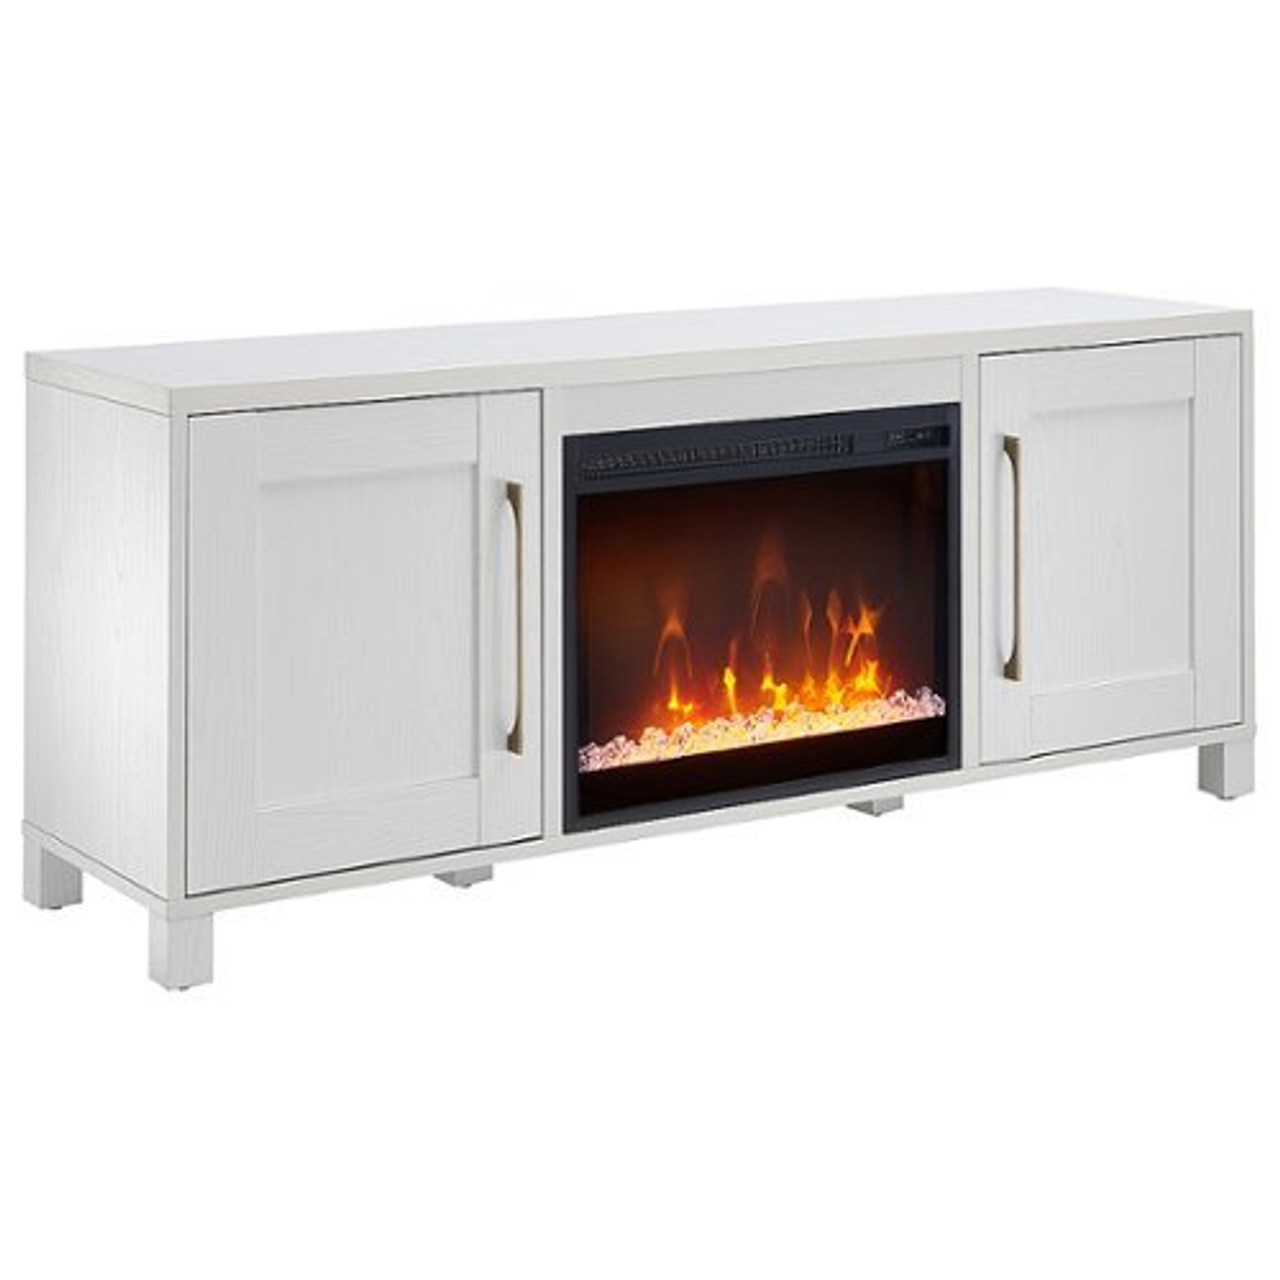 Camden&Wells - Chabot Crystal Fireplace TV Stand for TVs up to 65" - White